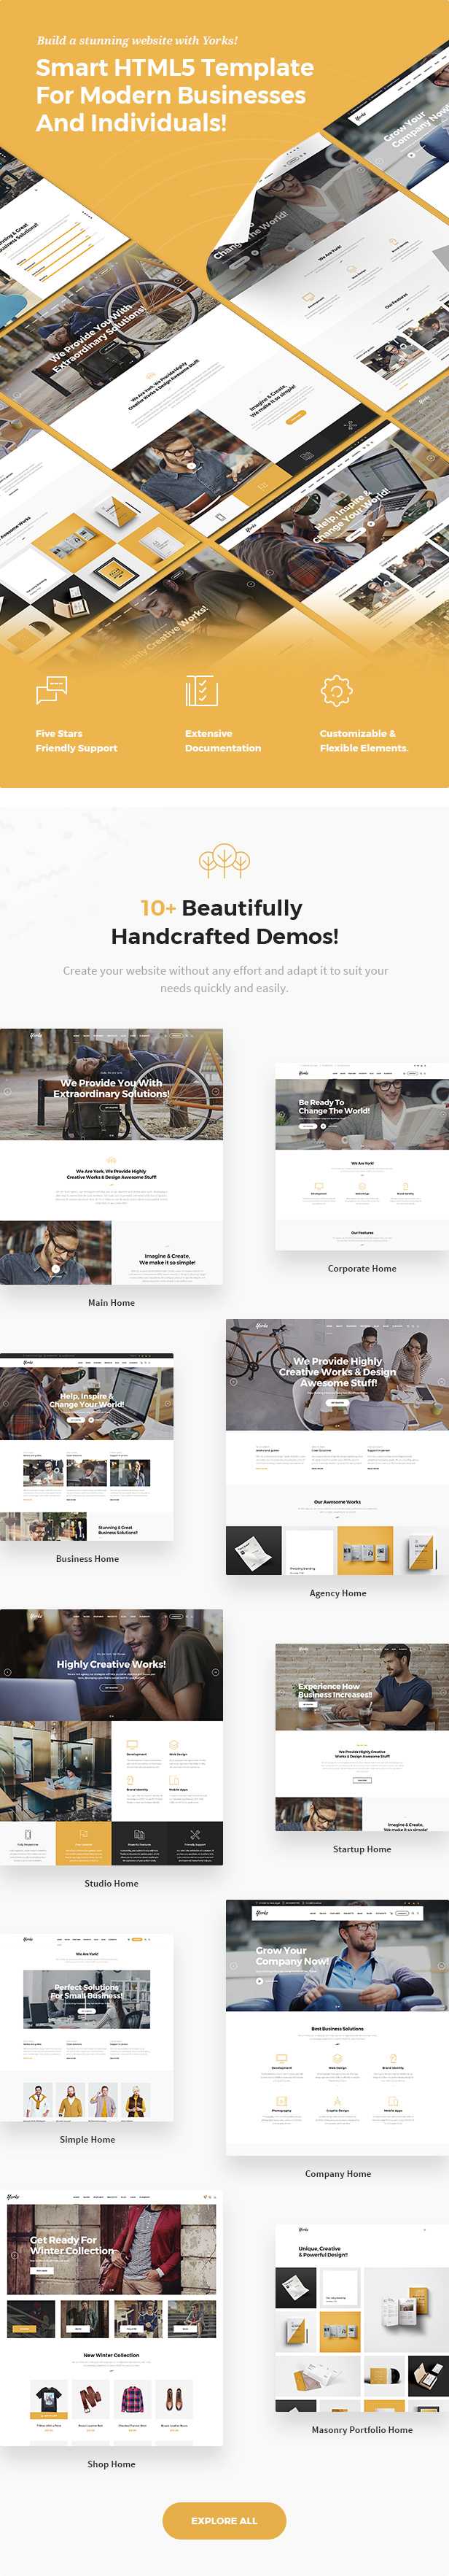 Yorks - Modern HTML5 Template For Businesses & Individuals - 5